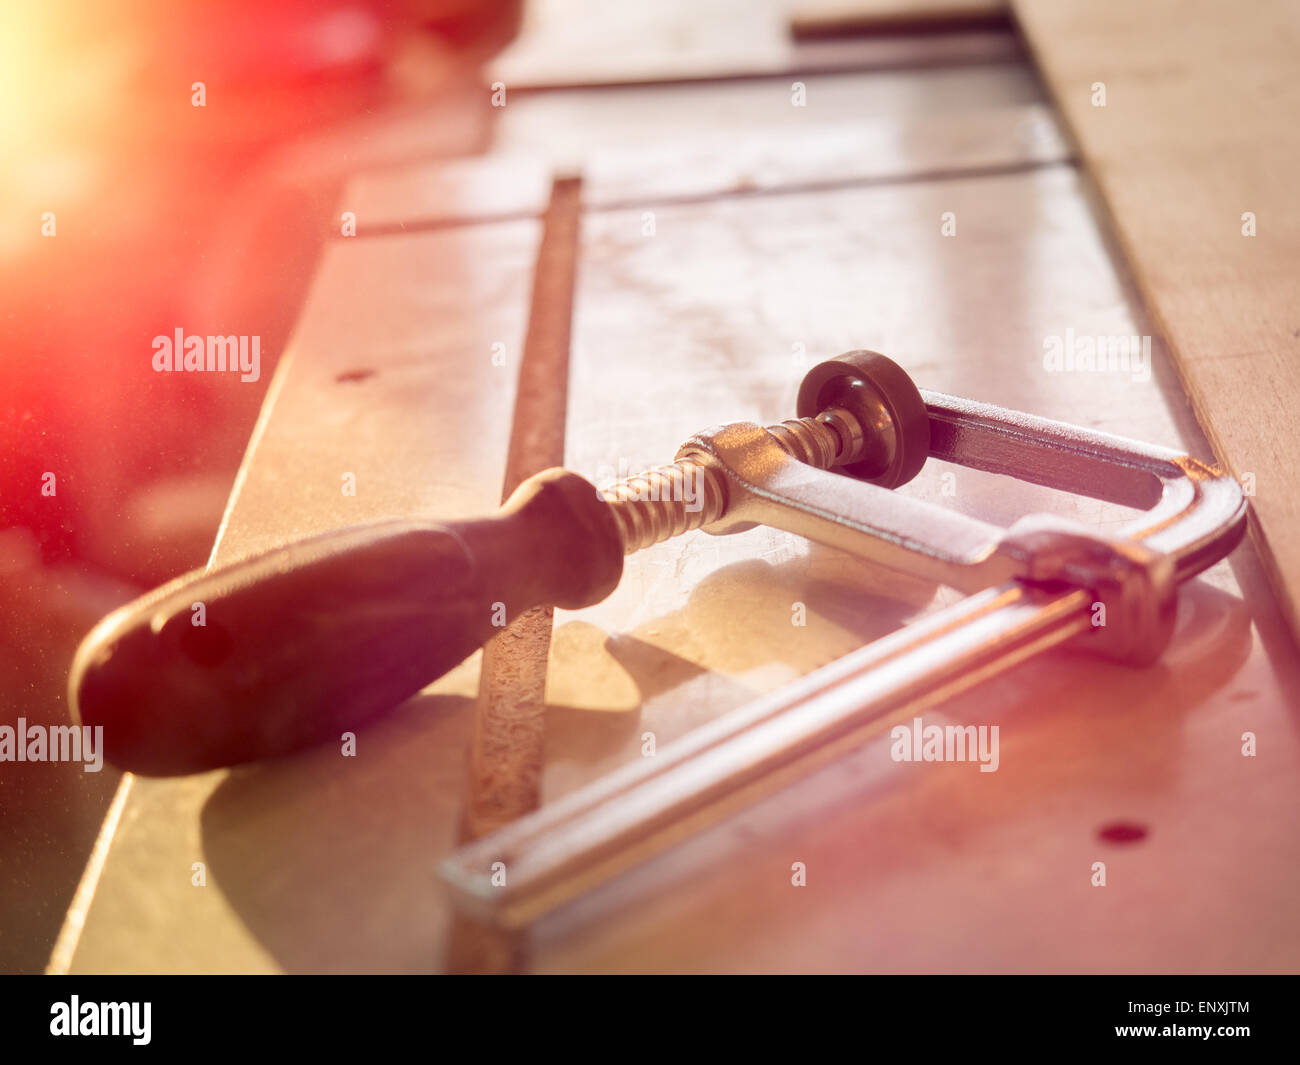 Real woodworking shop: clamps holding workpiece gluing, close-up Stock Photo